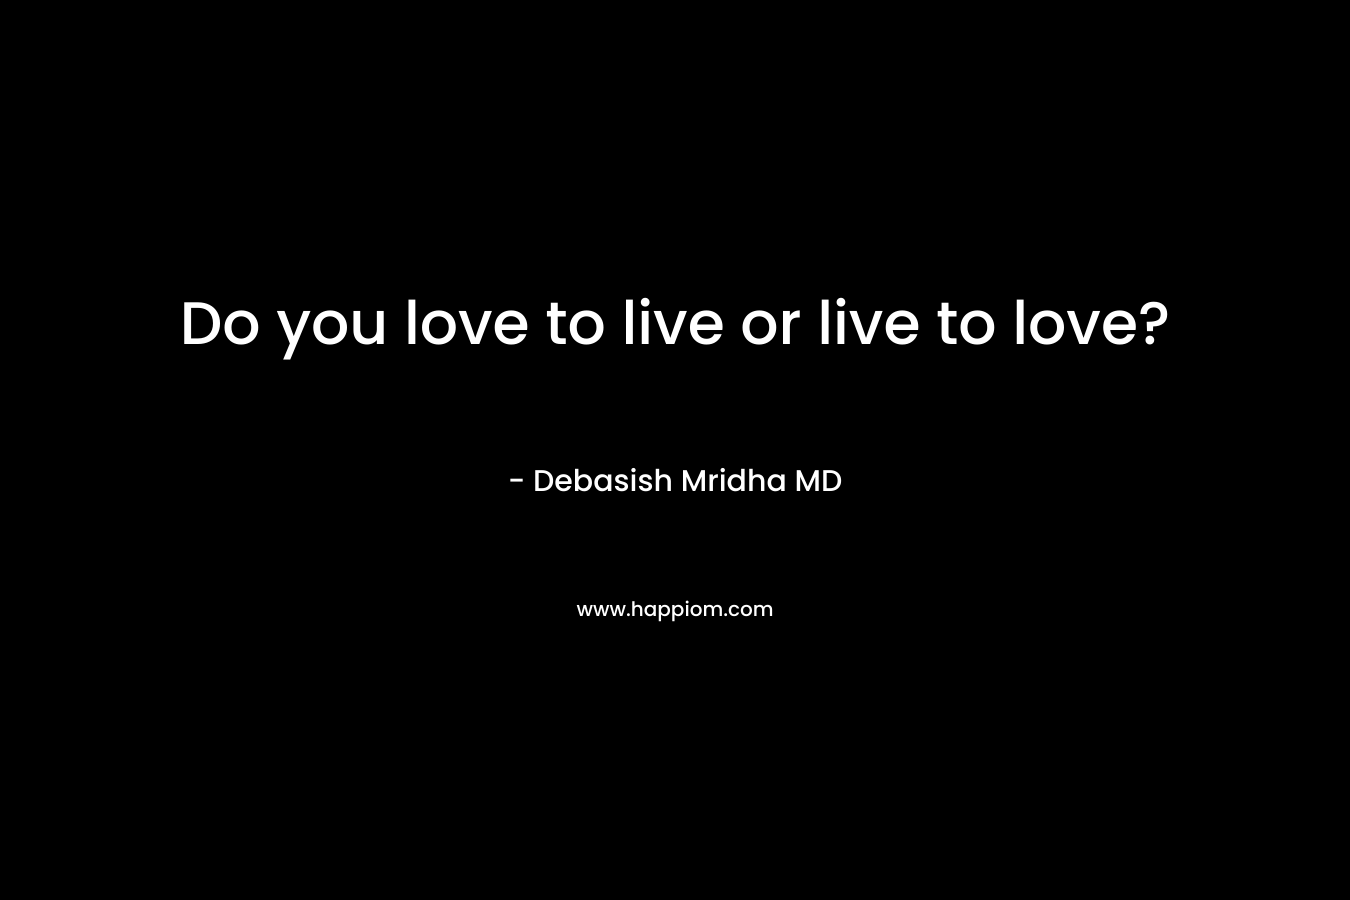 Do you love to live or live to love?